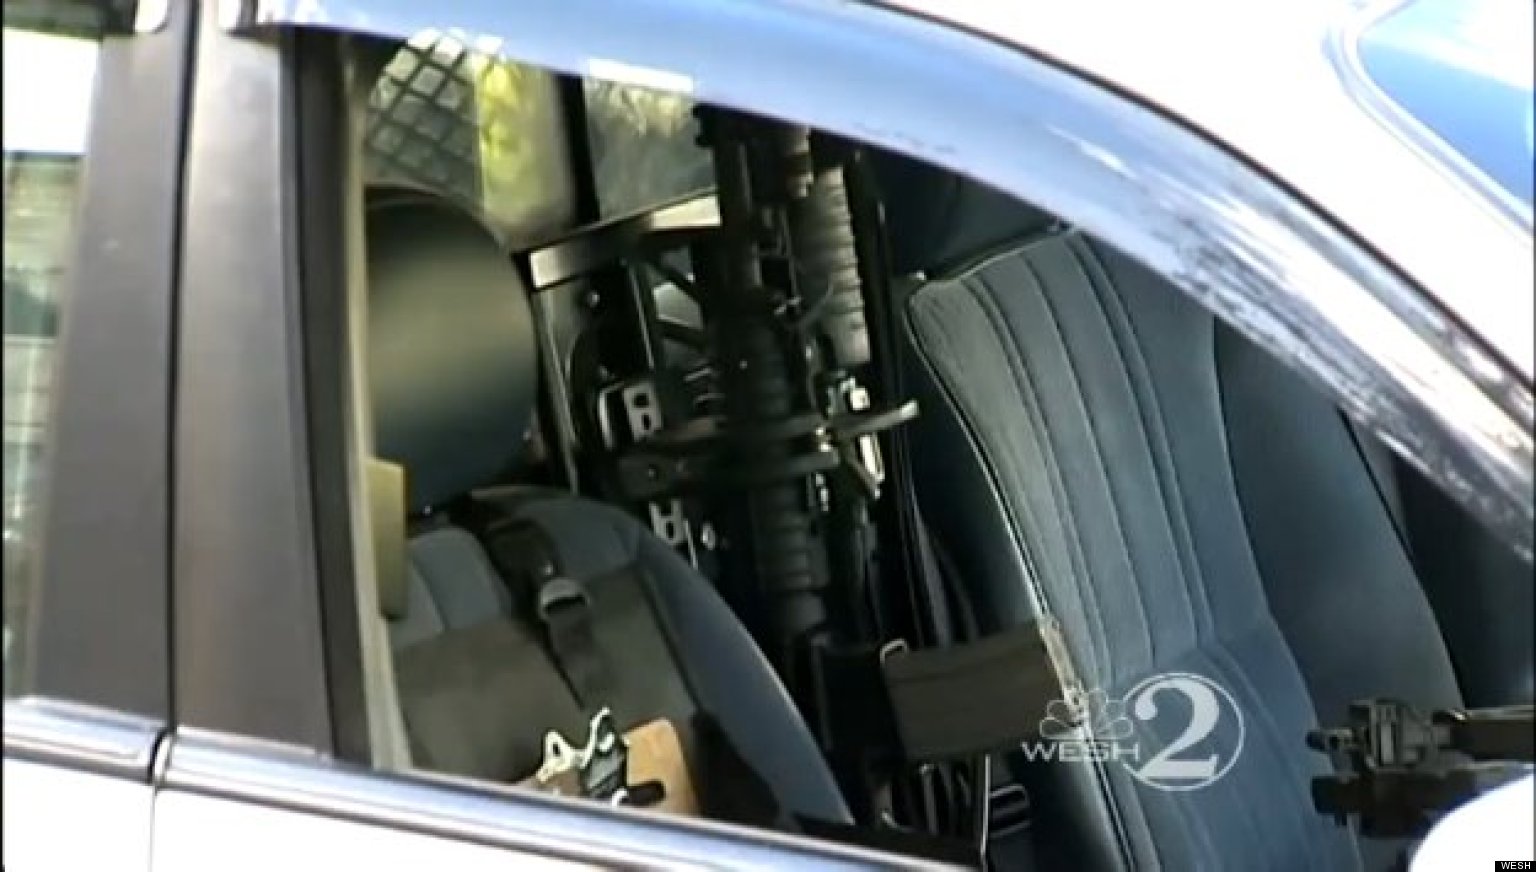 Cop Leaves Loaded AR-15 Semi-Automatic Rifle In Police Car Parked With Window Open (VIDEO)